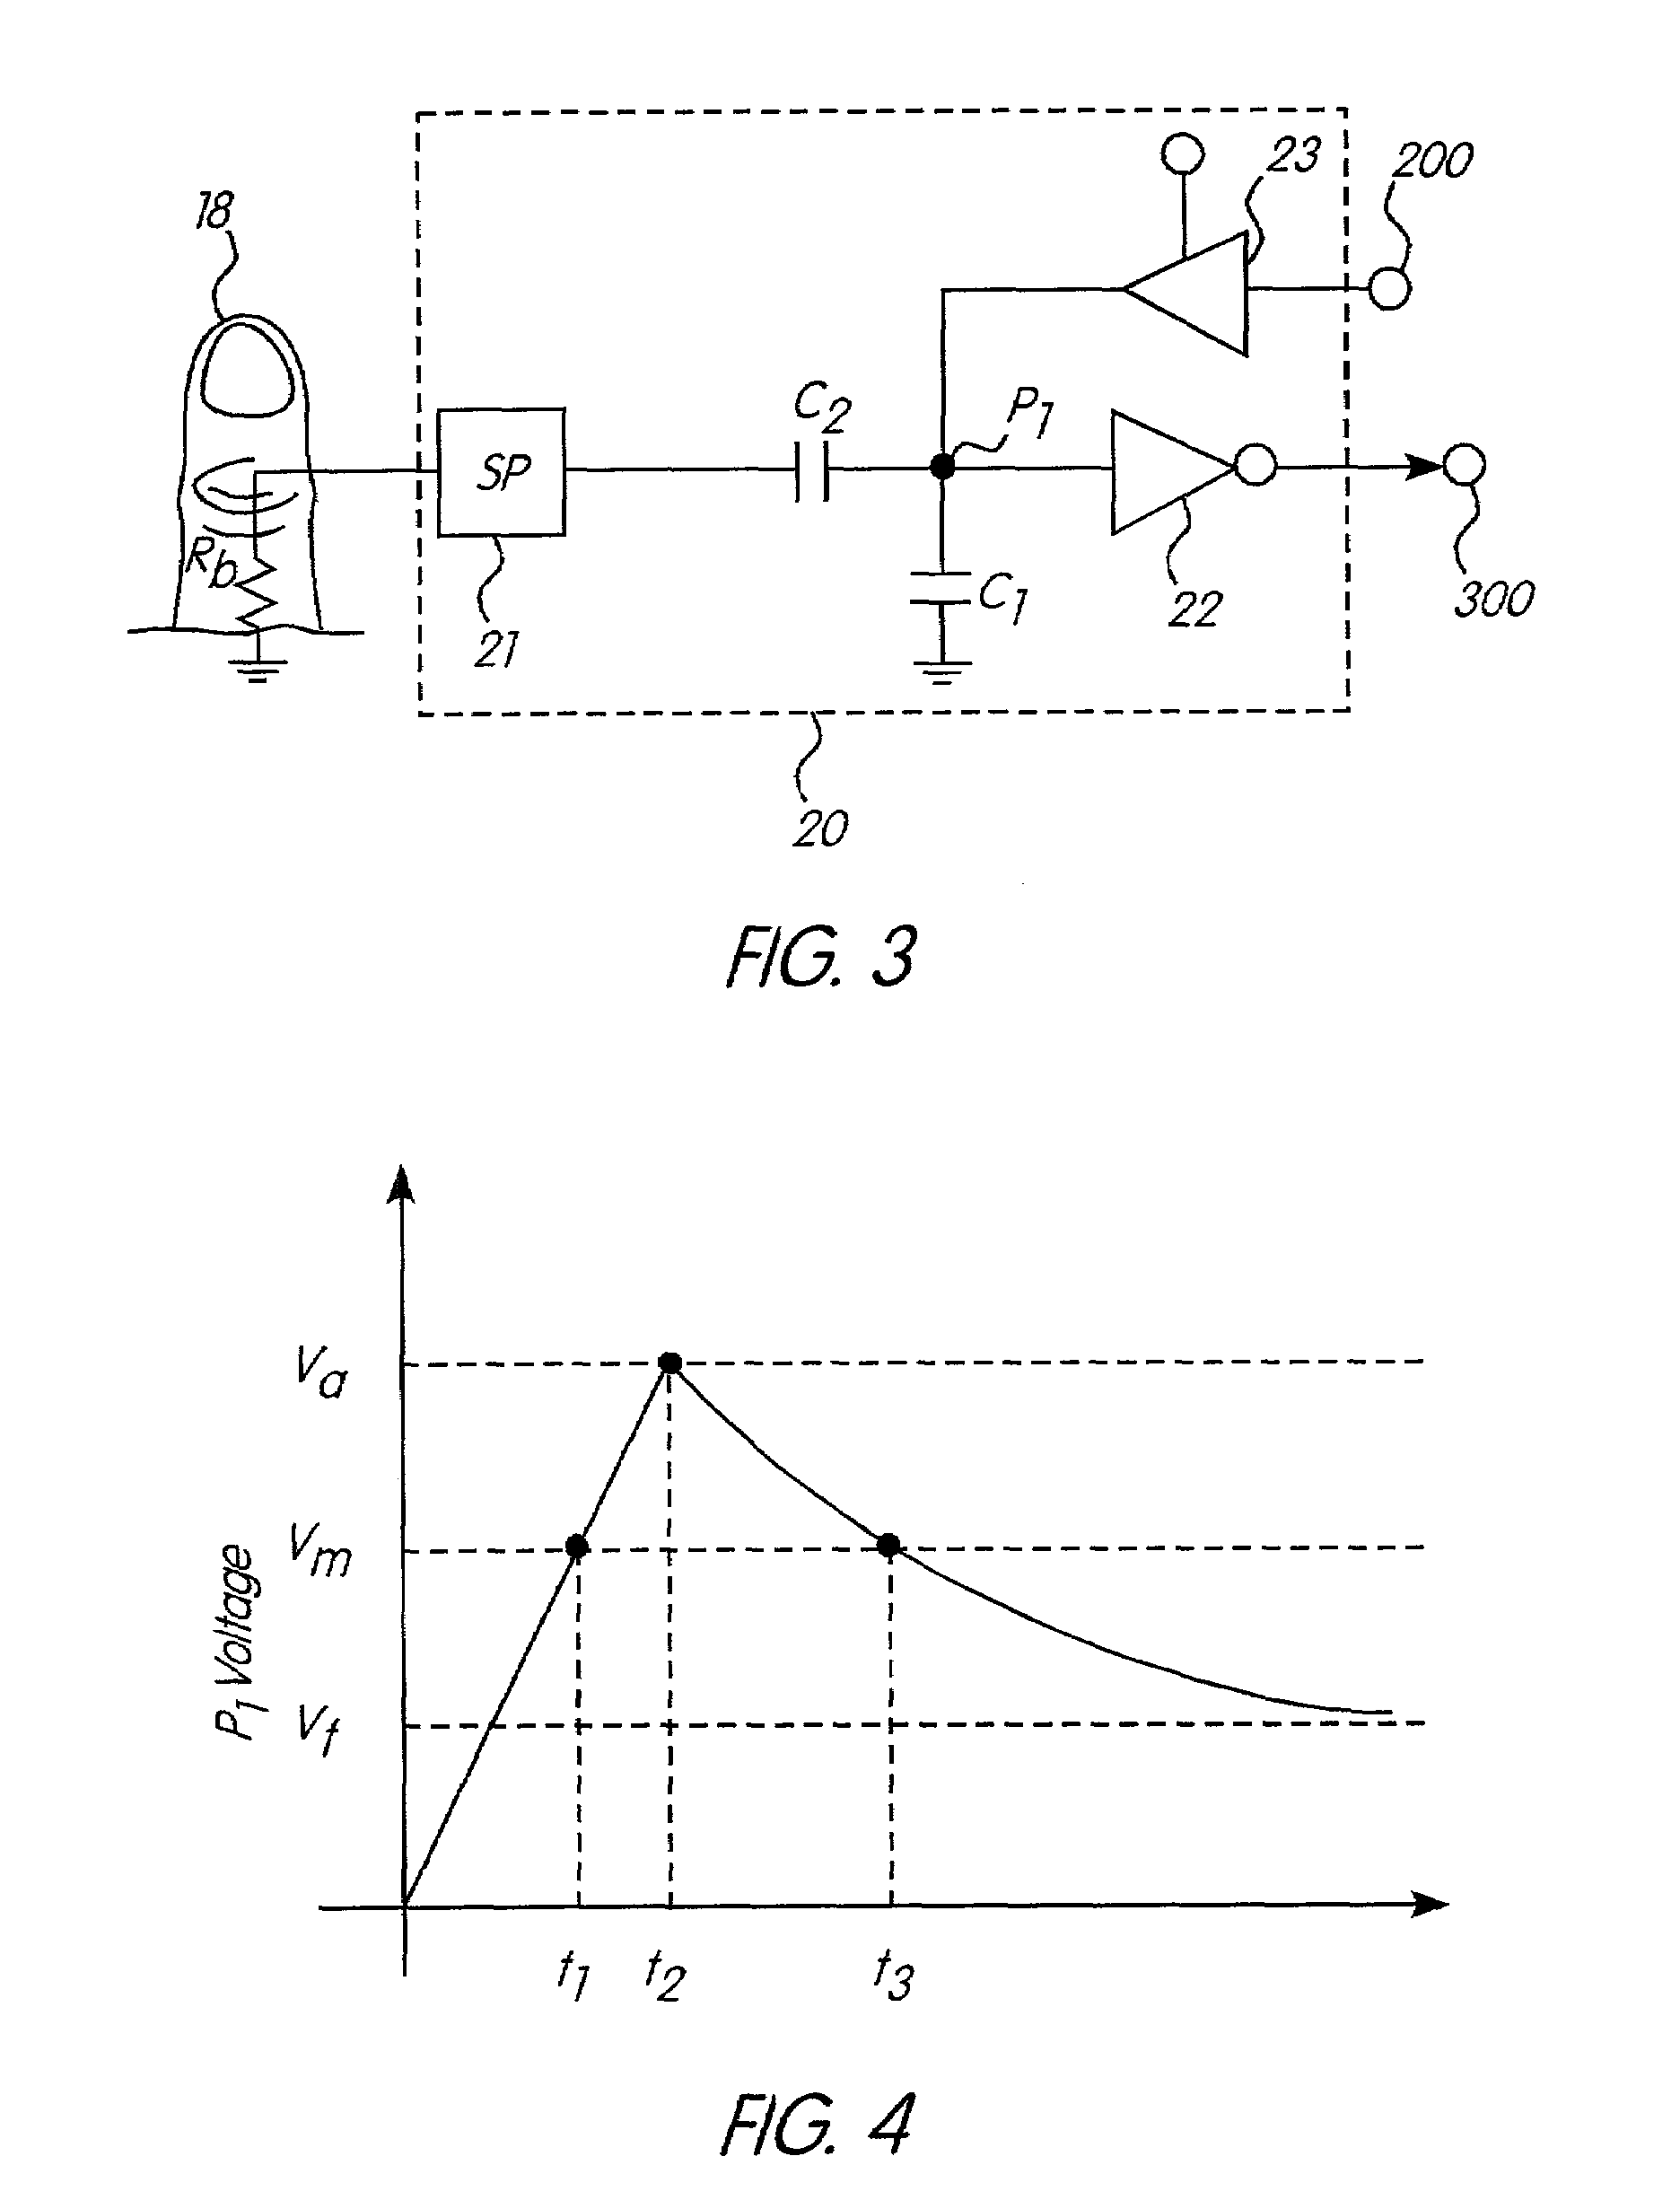 Apparatus and method for sensing the degree and touch strength of a human body on a sensor